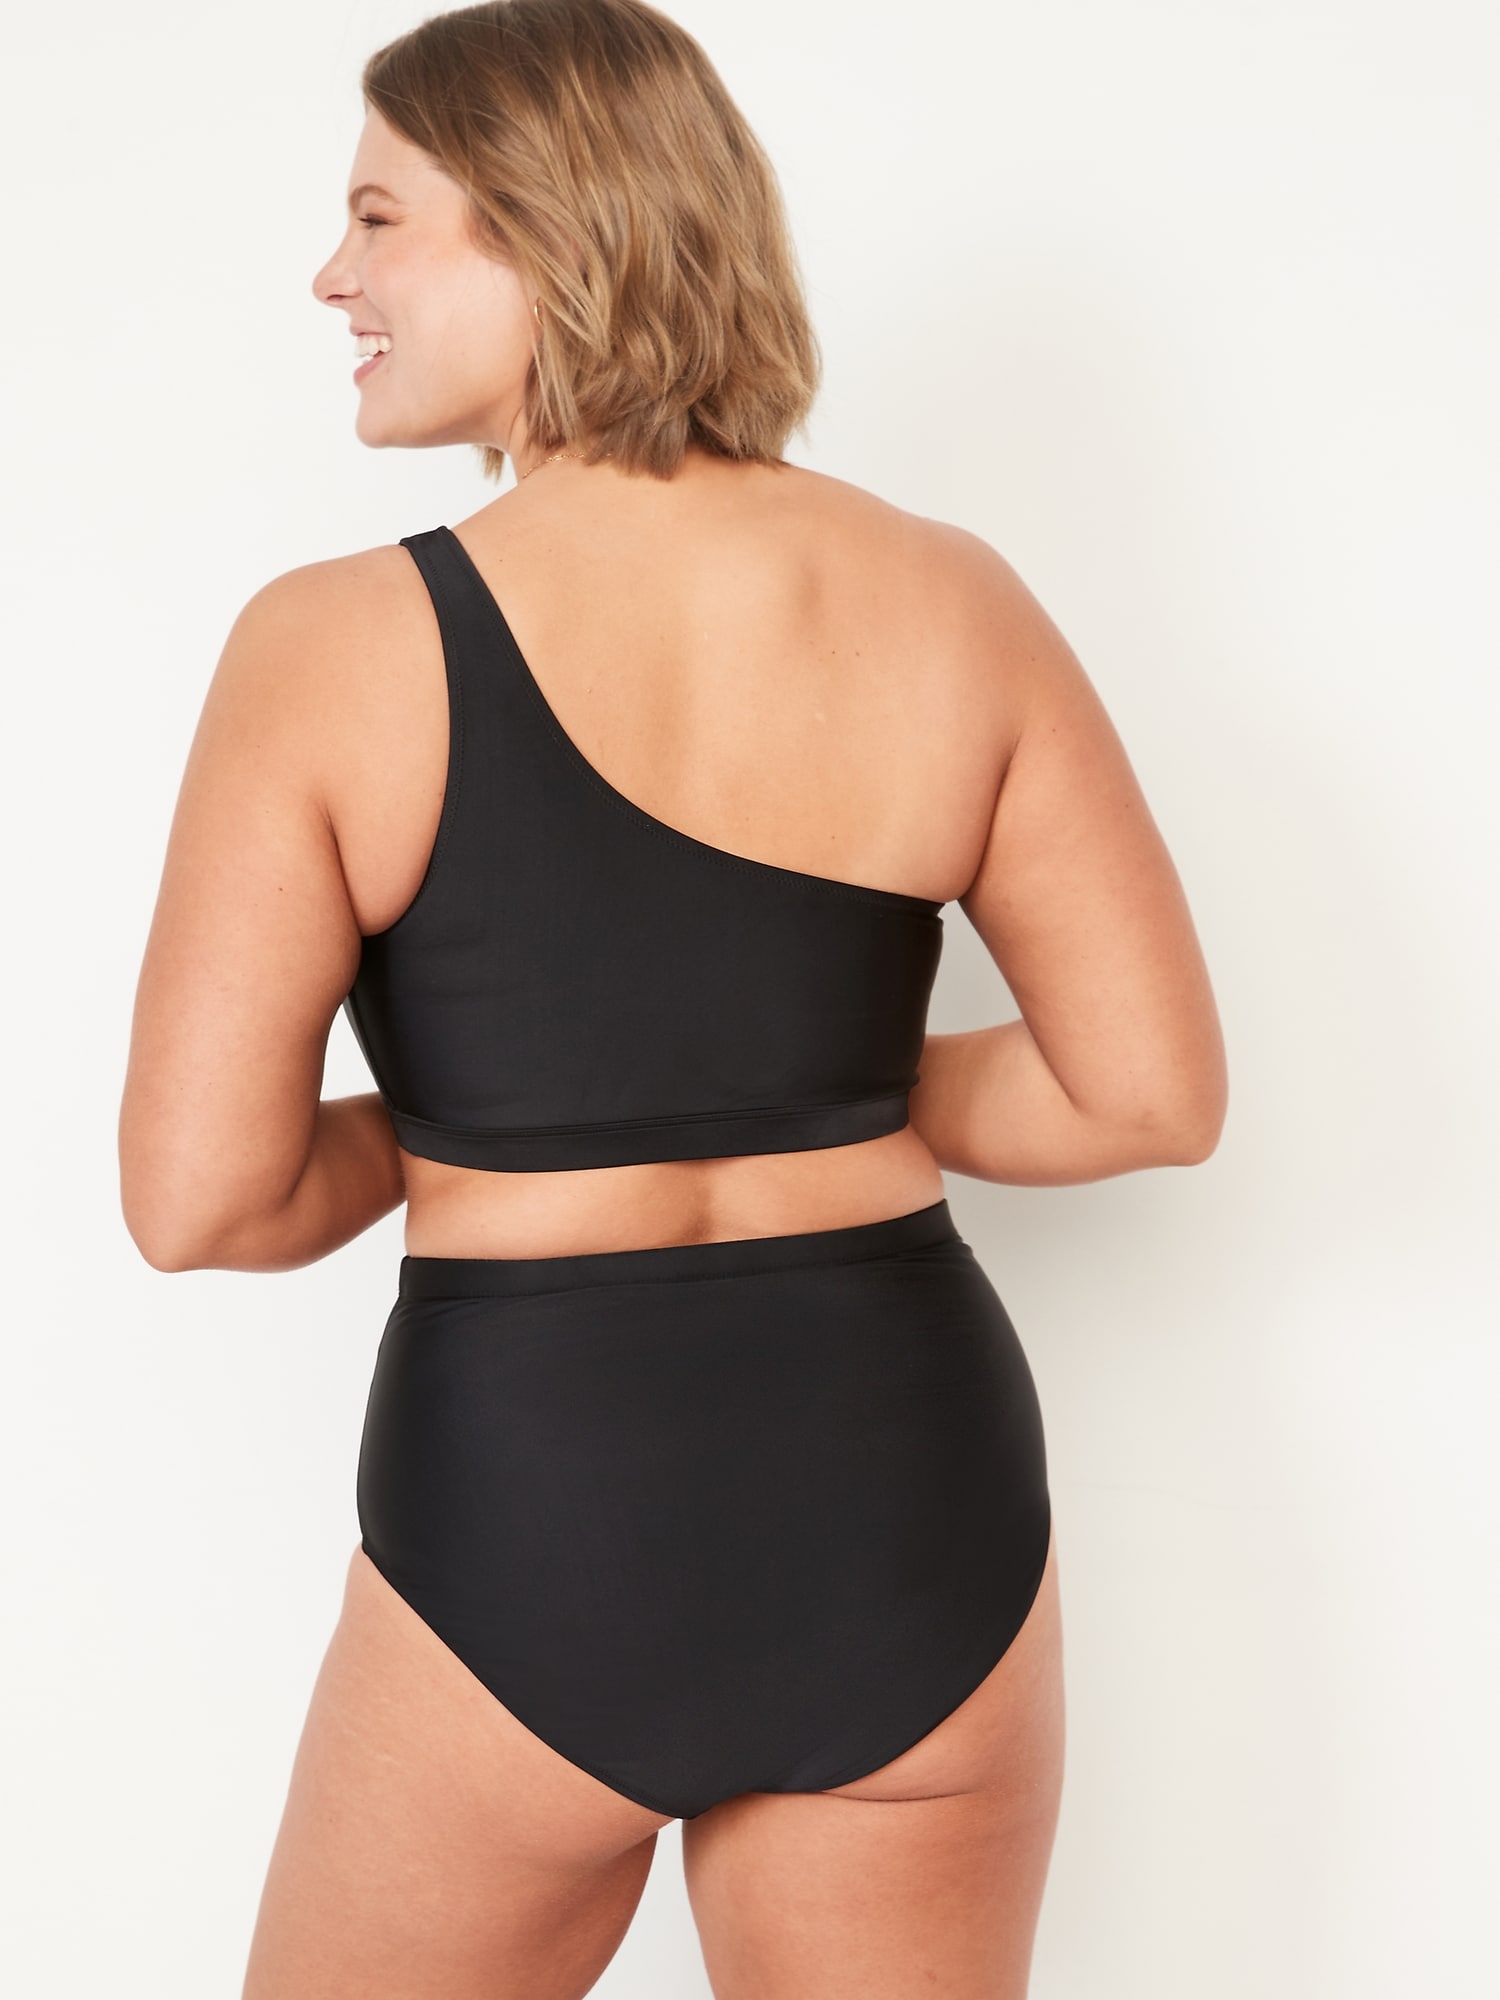 Extra High-Waisted French-Cut Swim Bottoms for Women